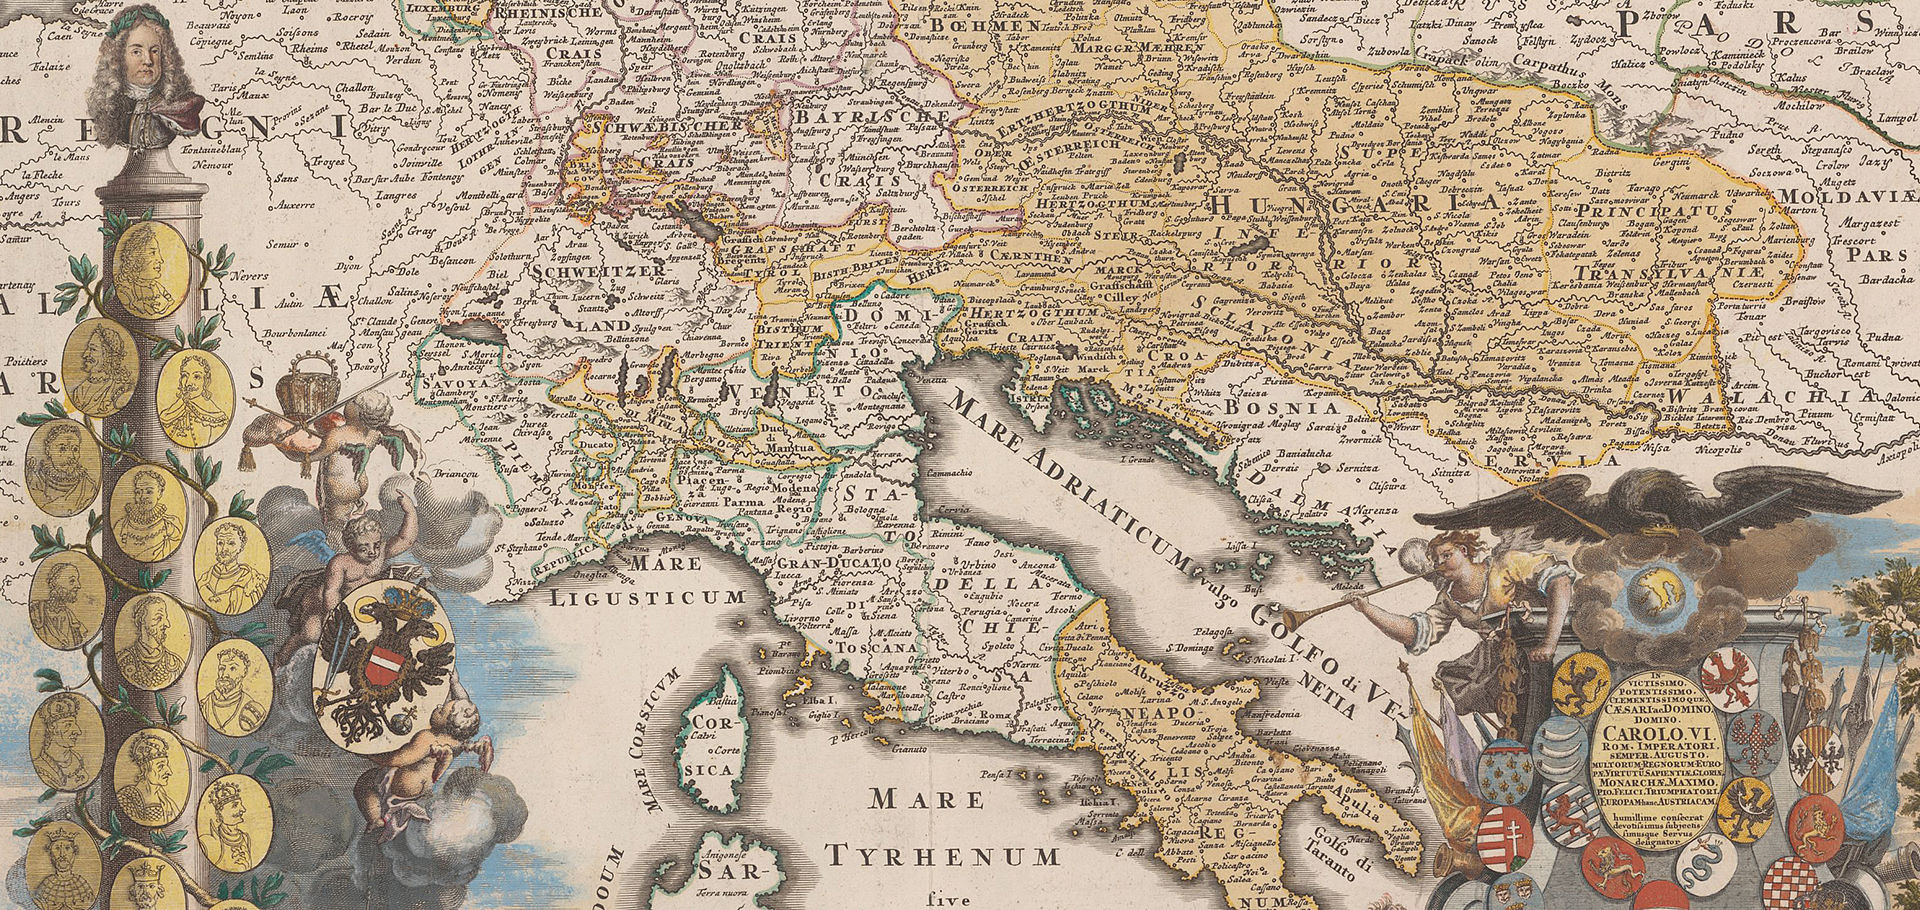 Homann: Europe with the Habsburg territories, ca. 1730